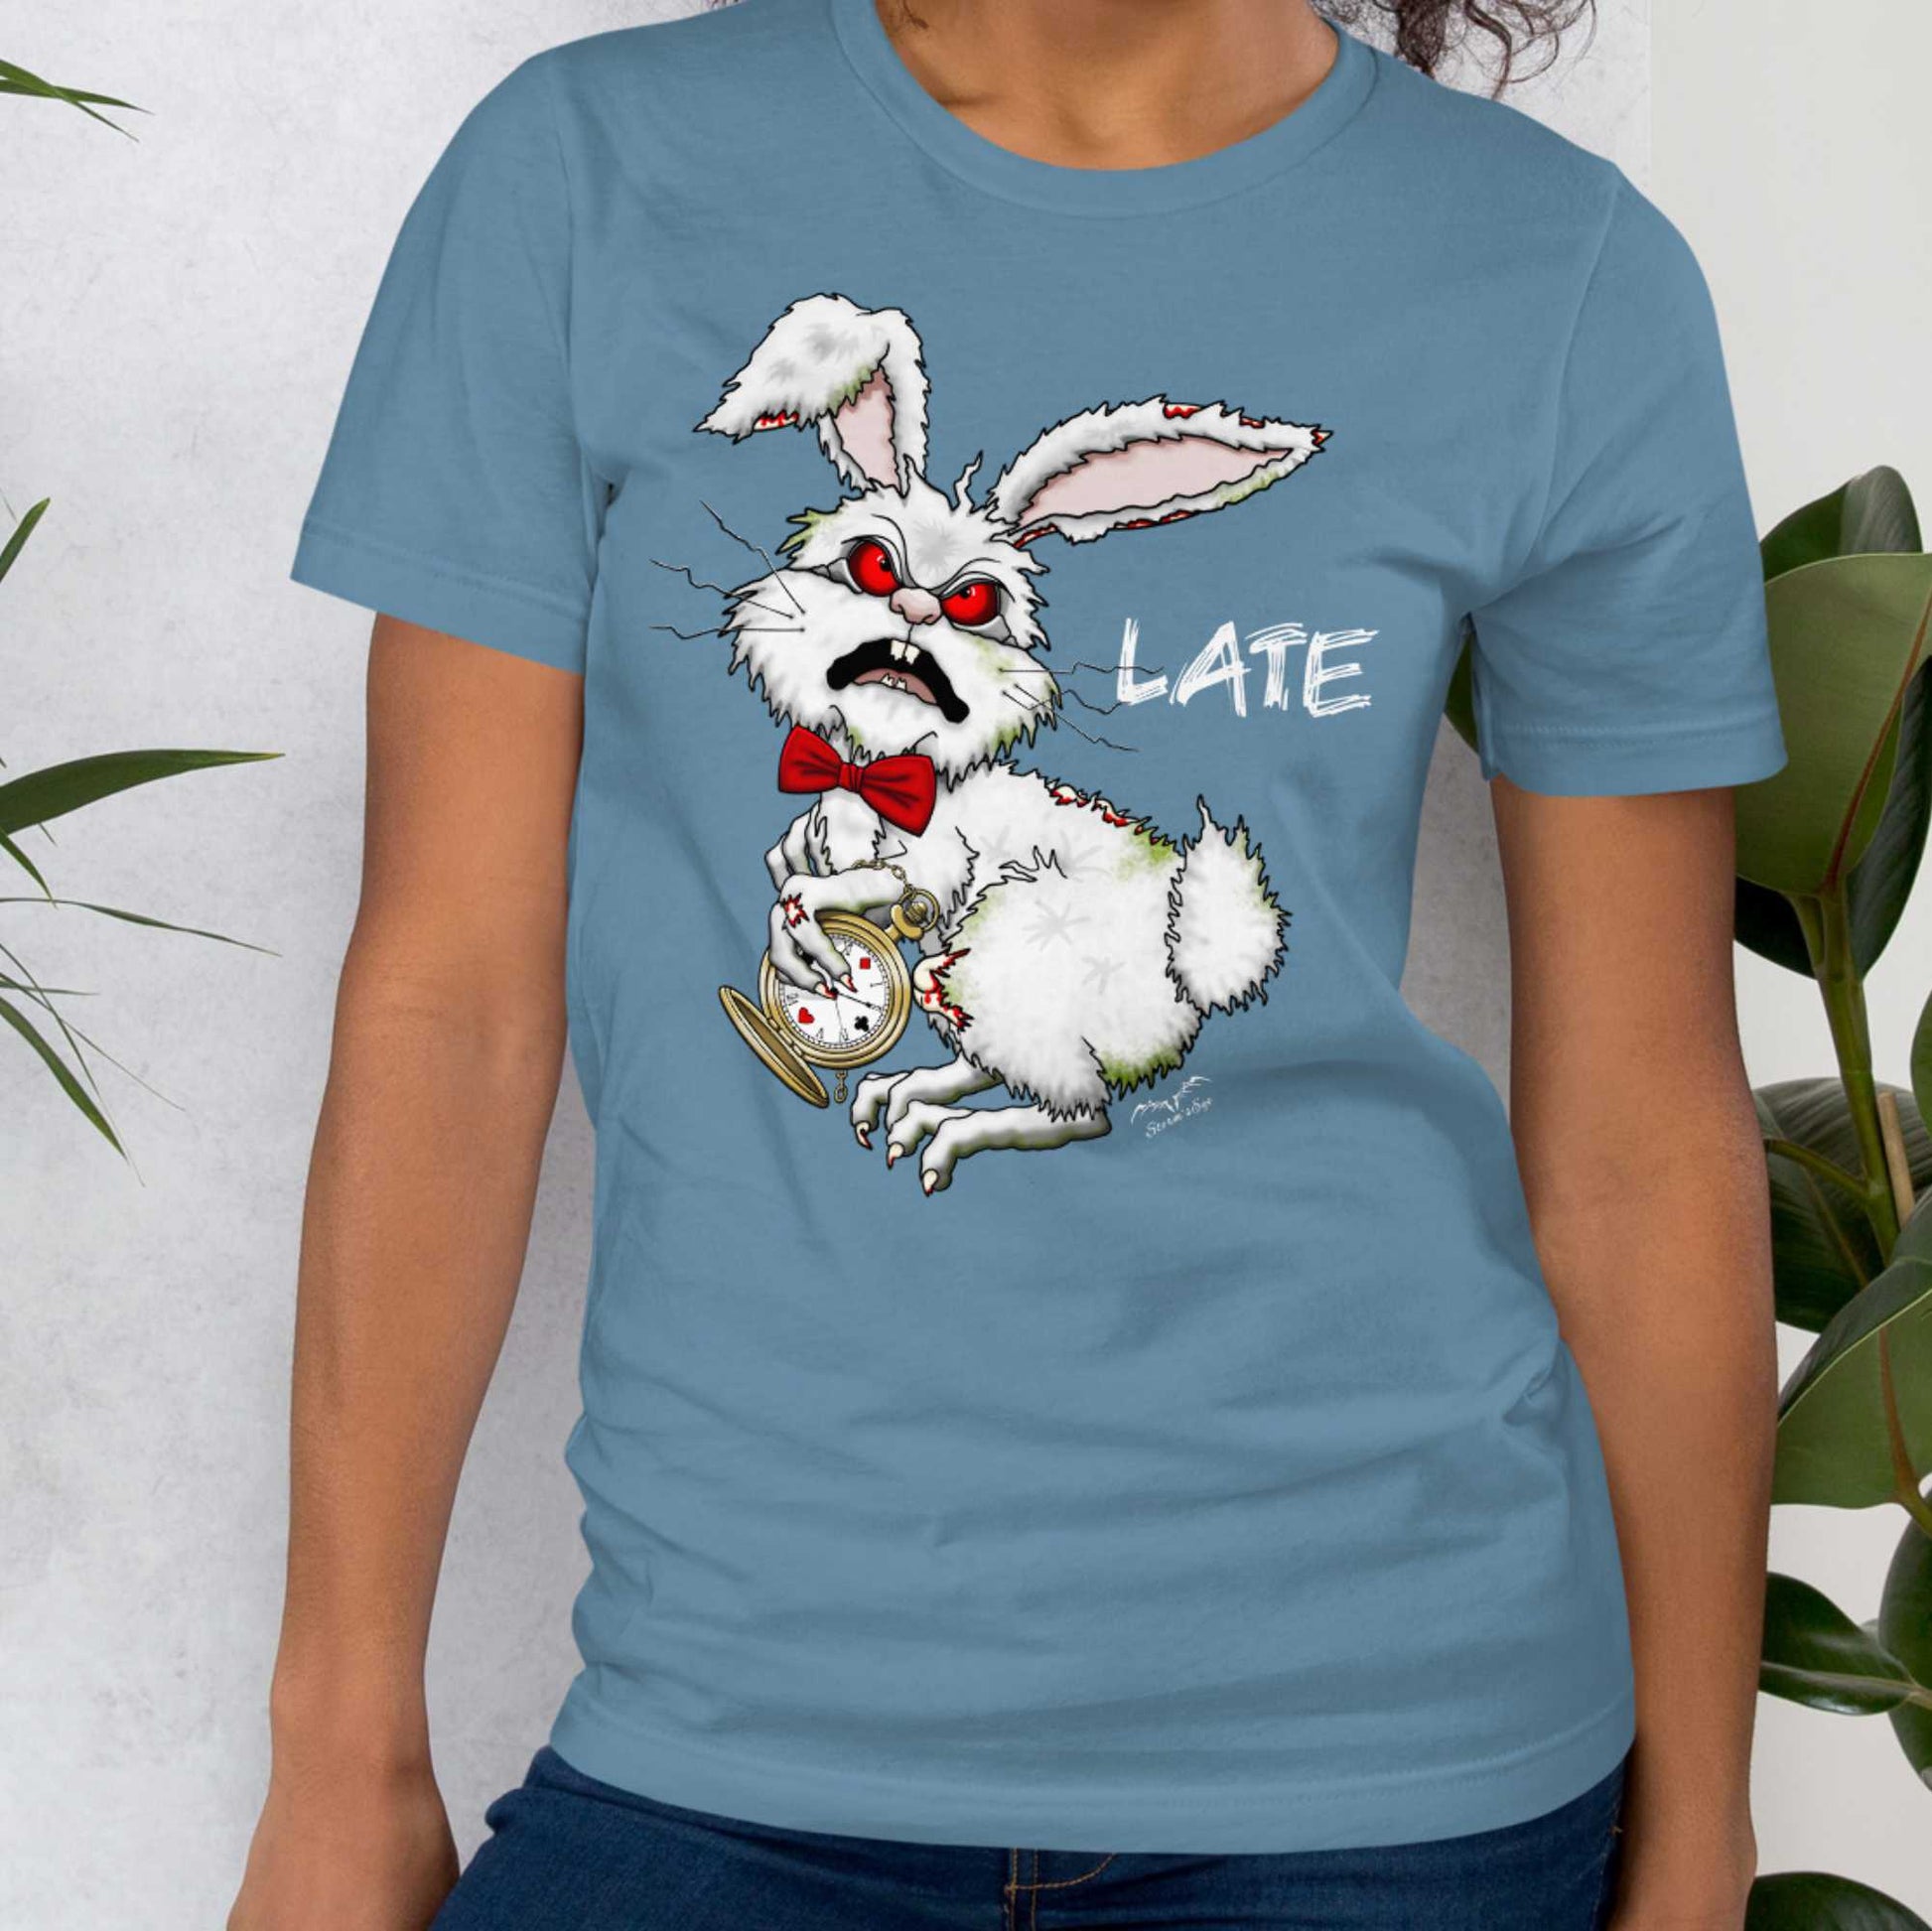 Stormseye Design zombie bunny t shirt, modelled view blue